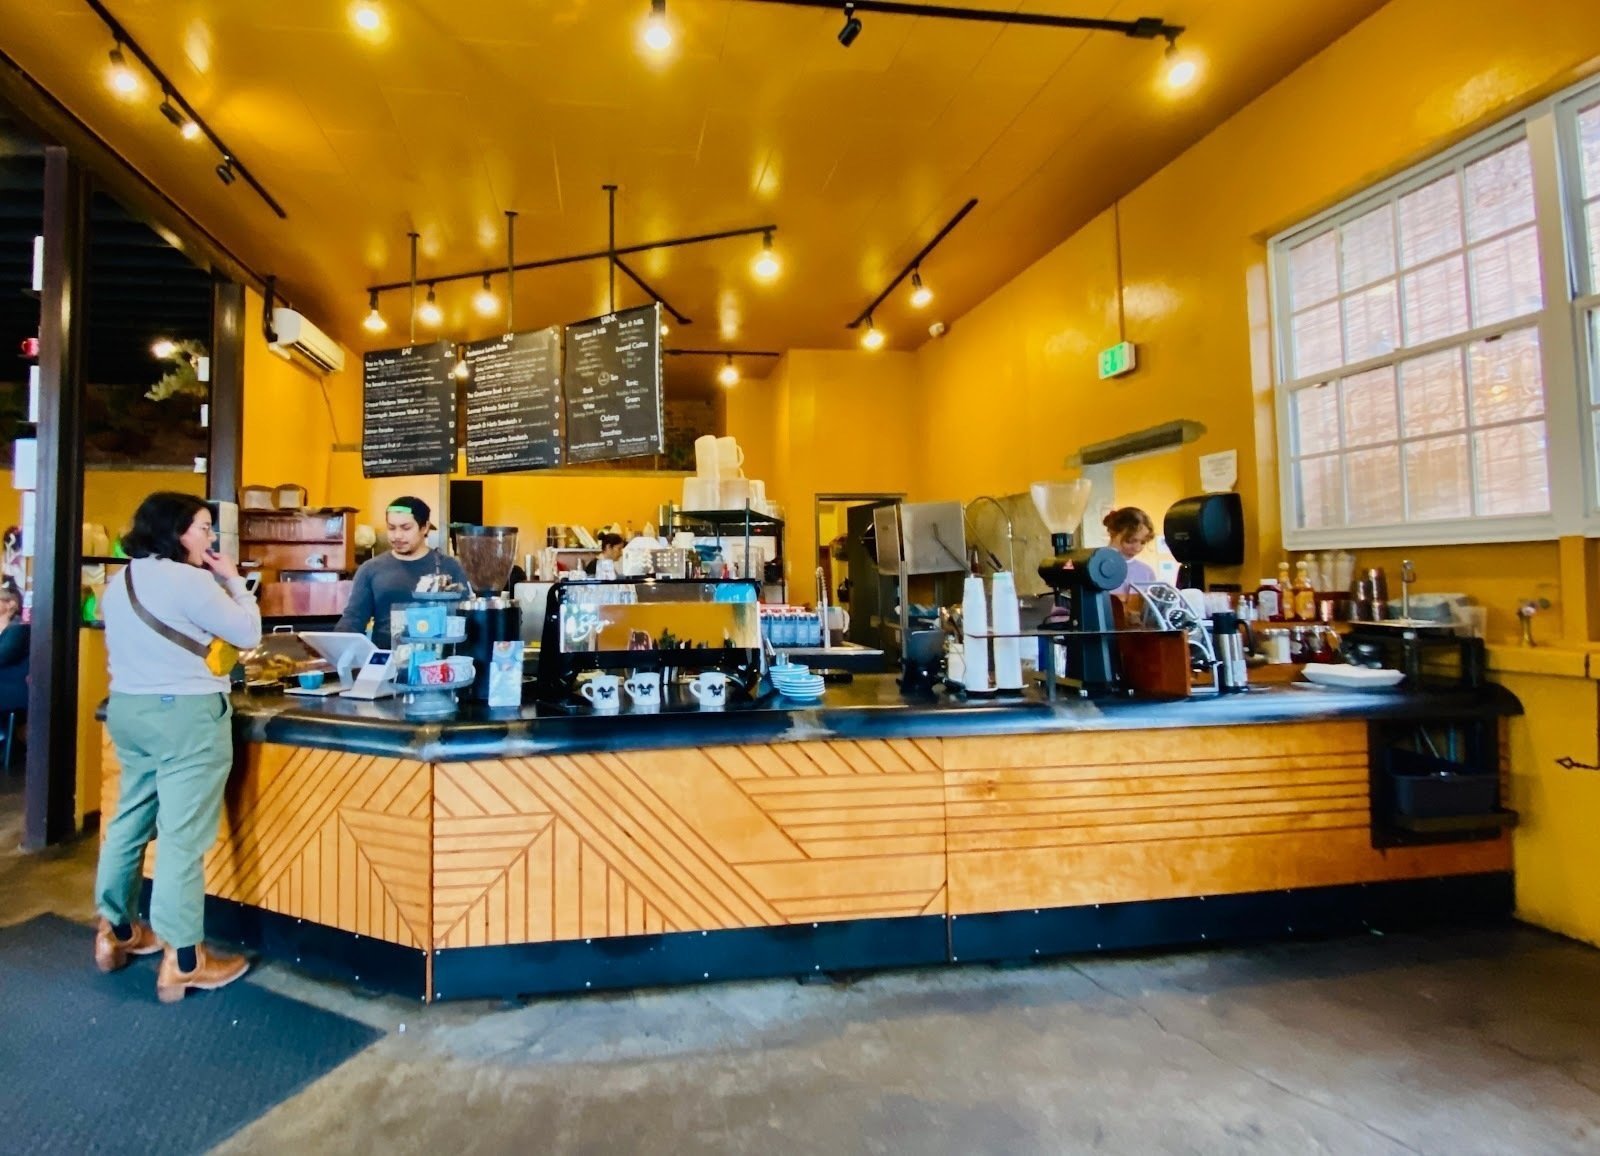 <span class="translation_missing" title="translation missing: en.meta.location_title, location_name: Iconik Coffee Roasters, Lupe, city: Santa Fe">Location Title</span>